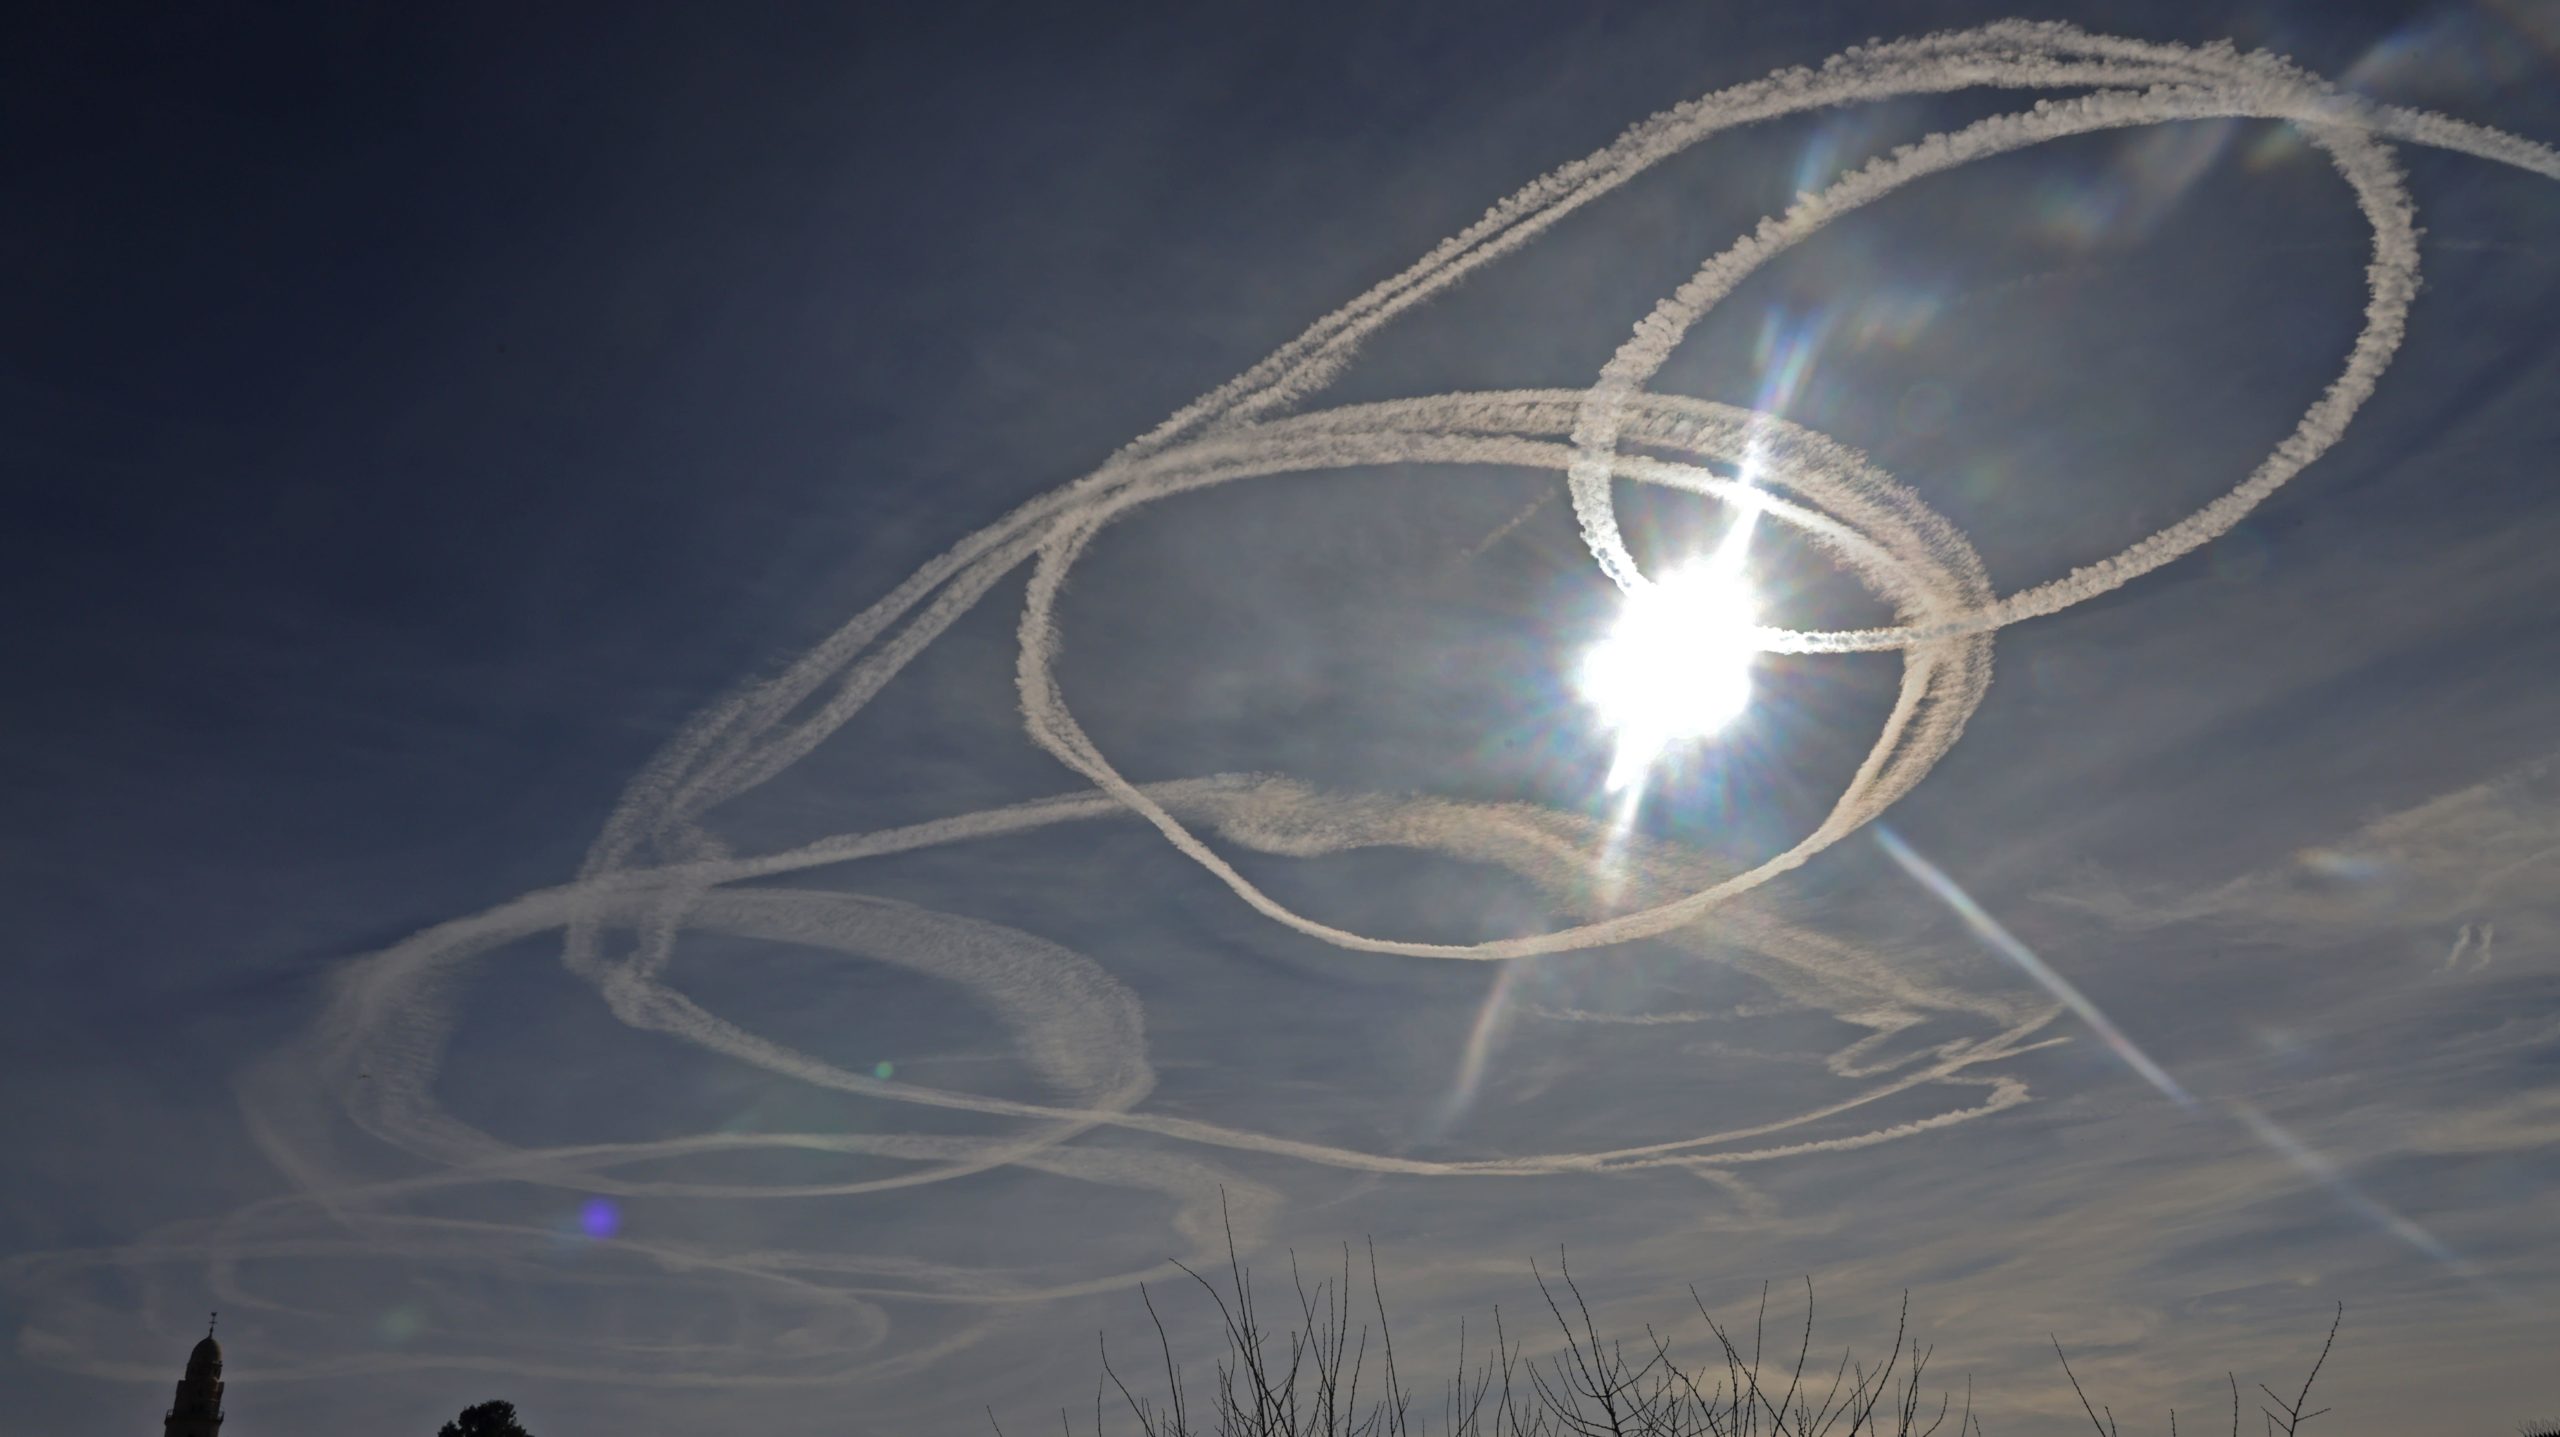 Aircraft contrails circle the sun above the Old City of Jerusalem on January 26, 2021.  (Photo: Emmanuel Dunand / AFP, Getty Images)